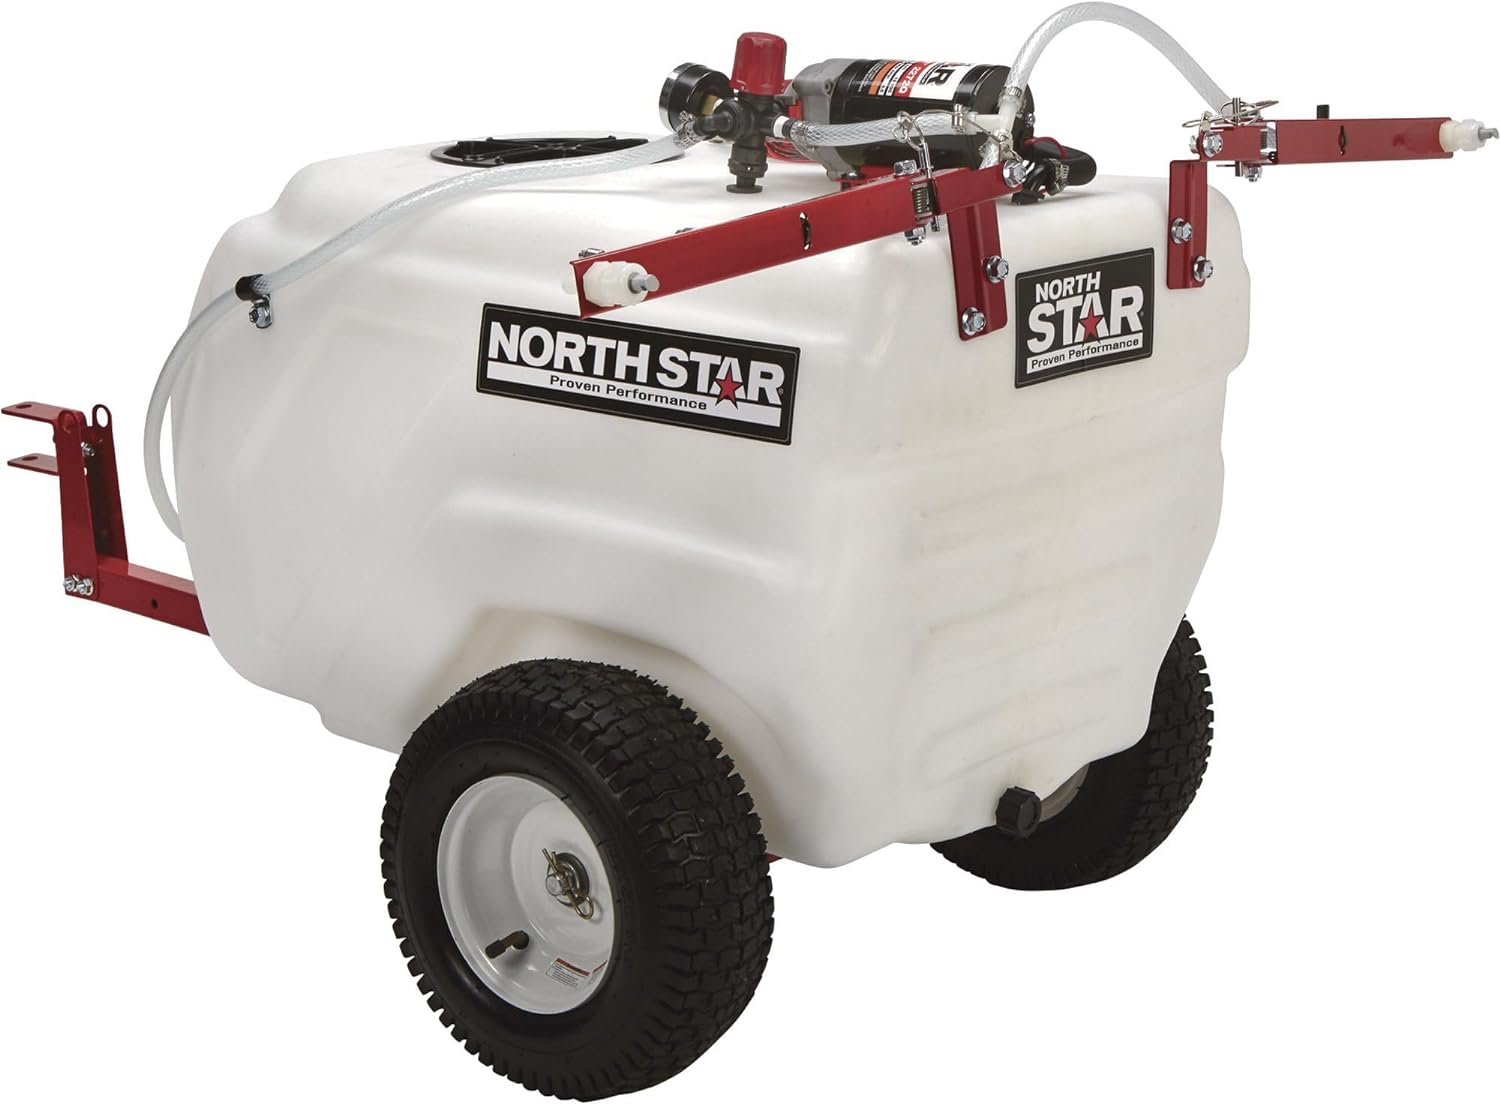 NorthStar Tow Behind Trailer Boom Broadcast and Spot Sprayer 31 Gallon